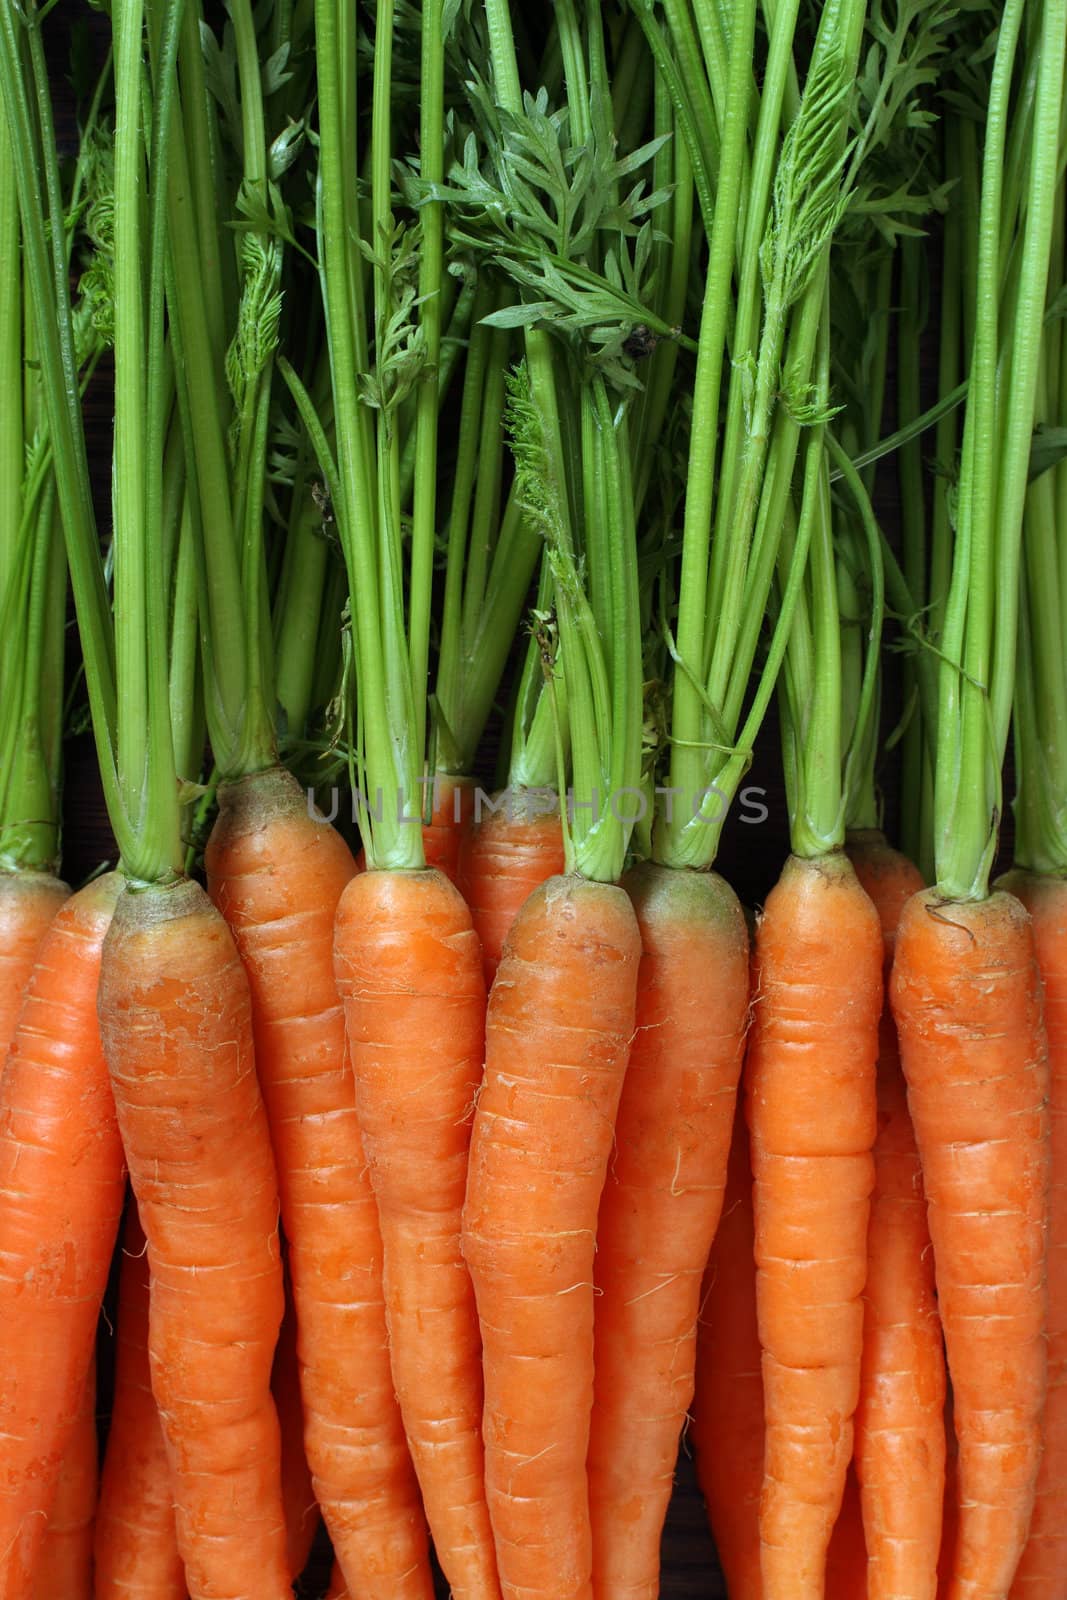 Photo of a bunch of carrots as a background.